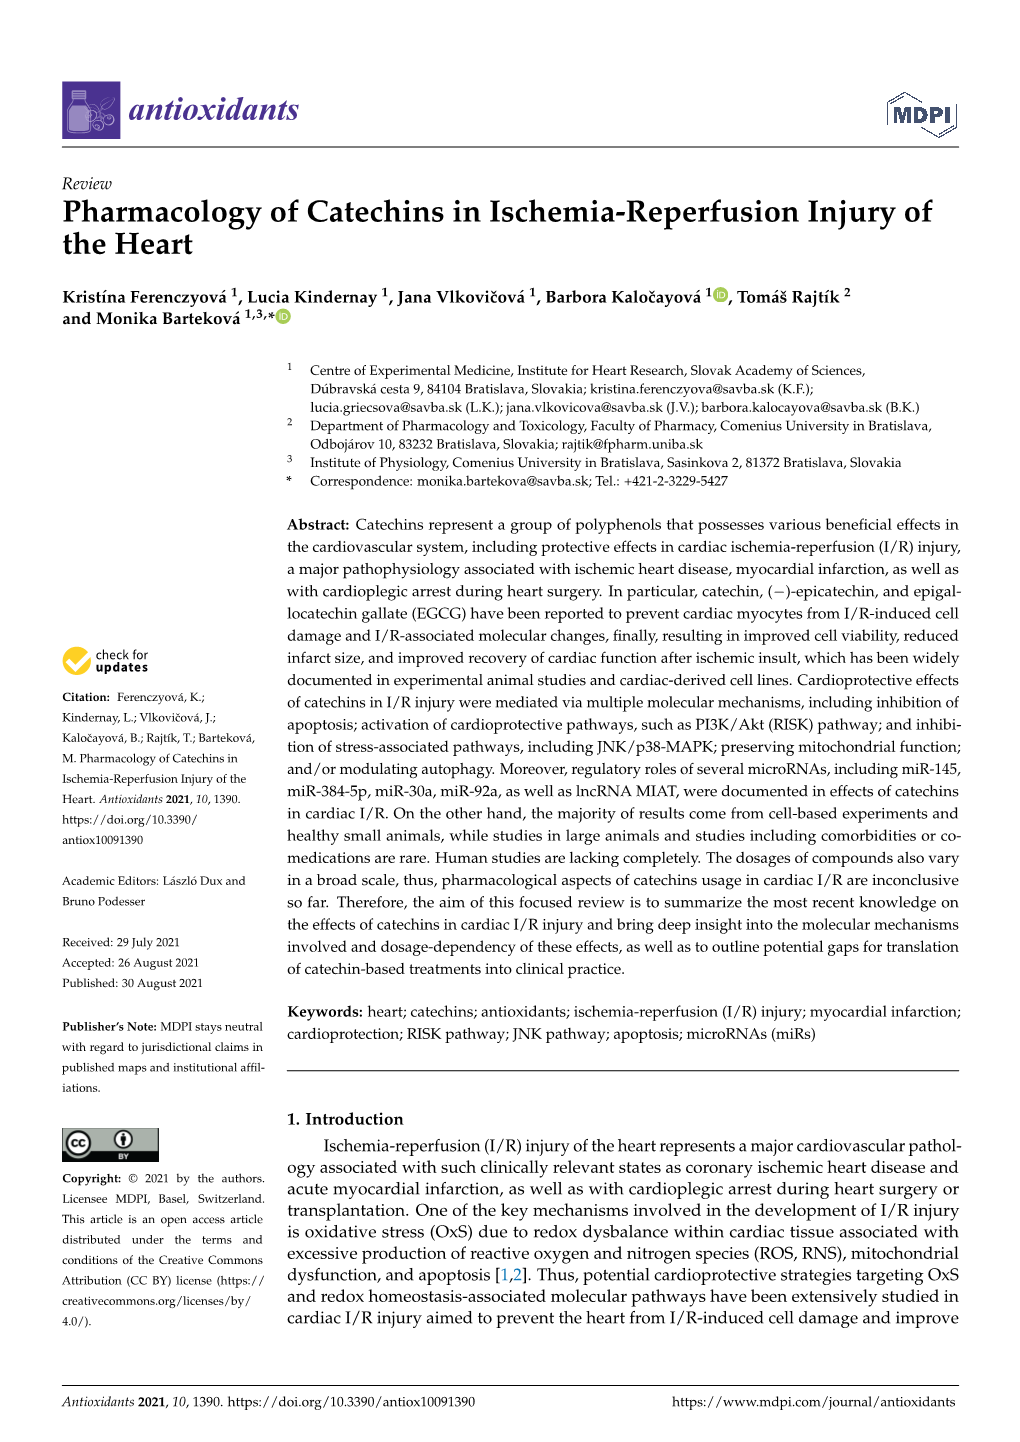 Pharmacology of Catechins in Ischemia-Reperfusion Injury of the Heart